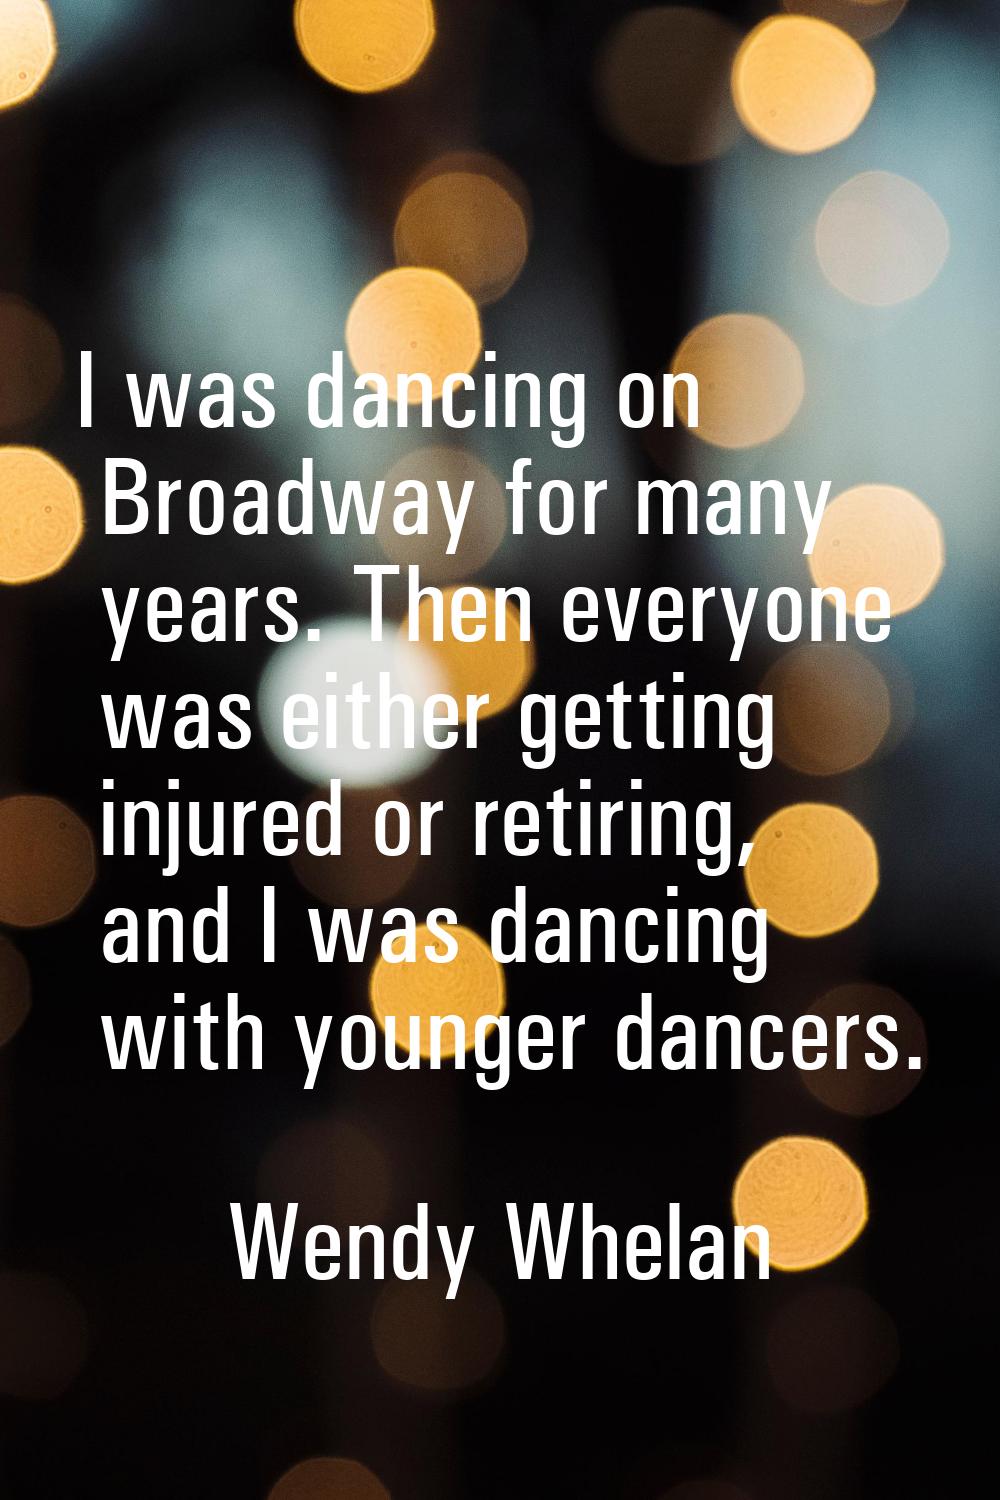 I was dancing on Broadway for many years. Then everyone was either getting injured or retiring, and